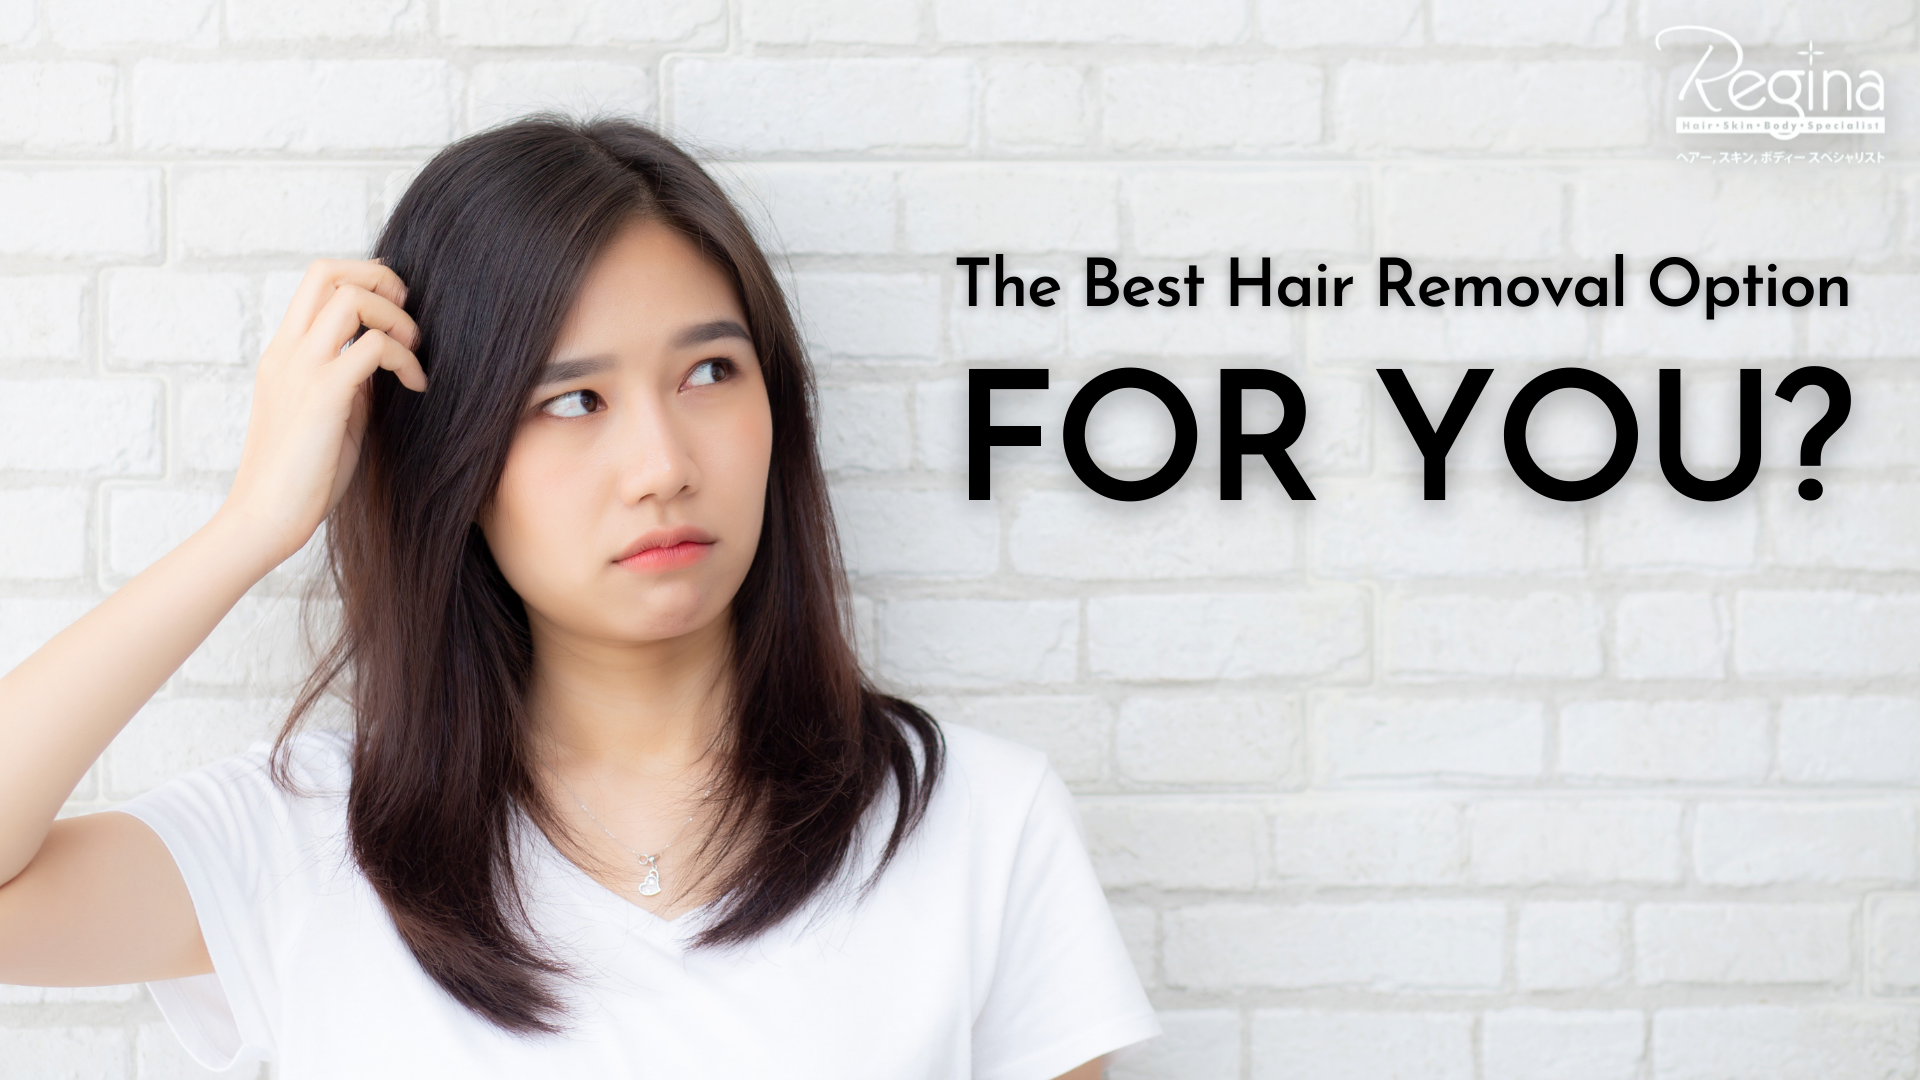 The Best Hair Removal Option For You